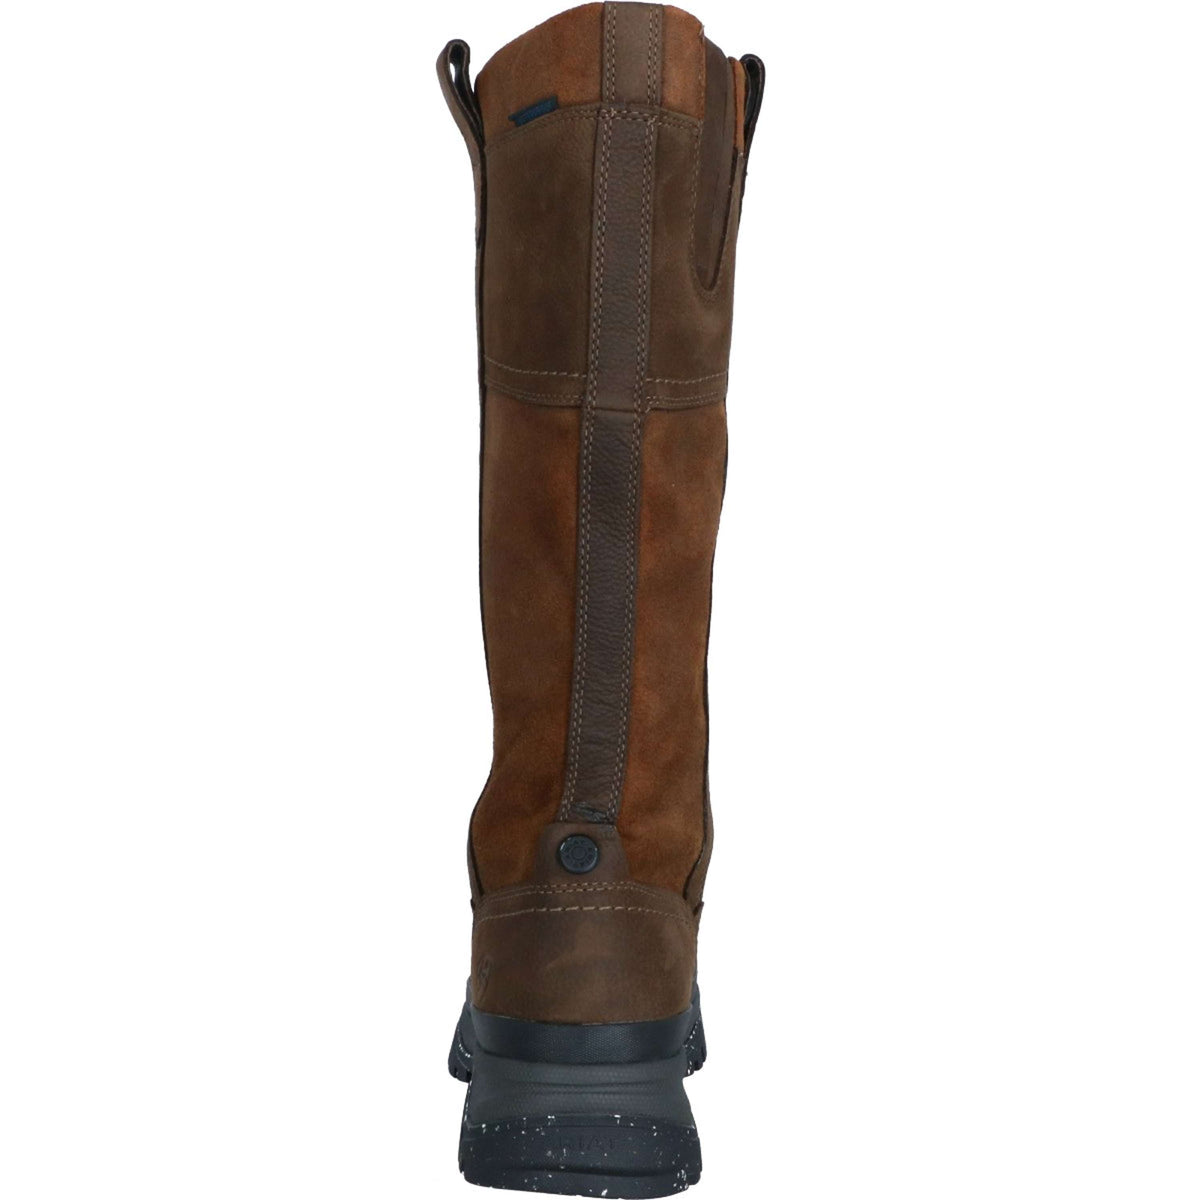 Ariat Outdoorstiefel Moresby Tall H2O Herren Java